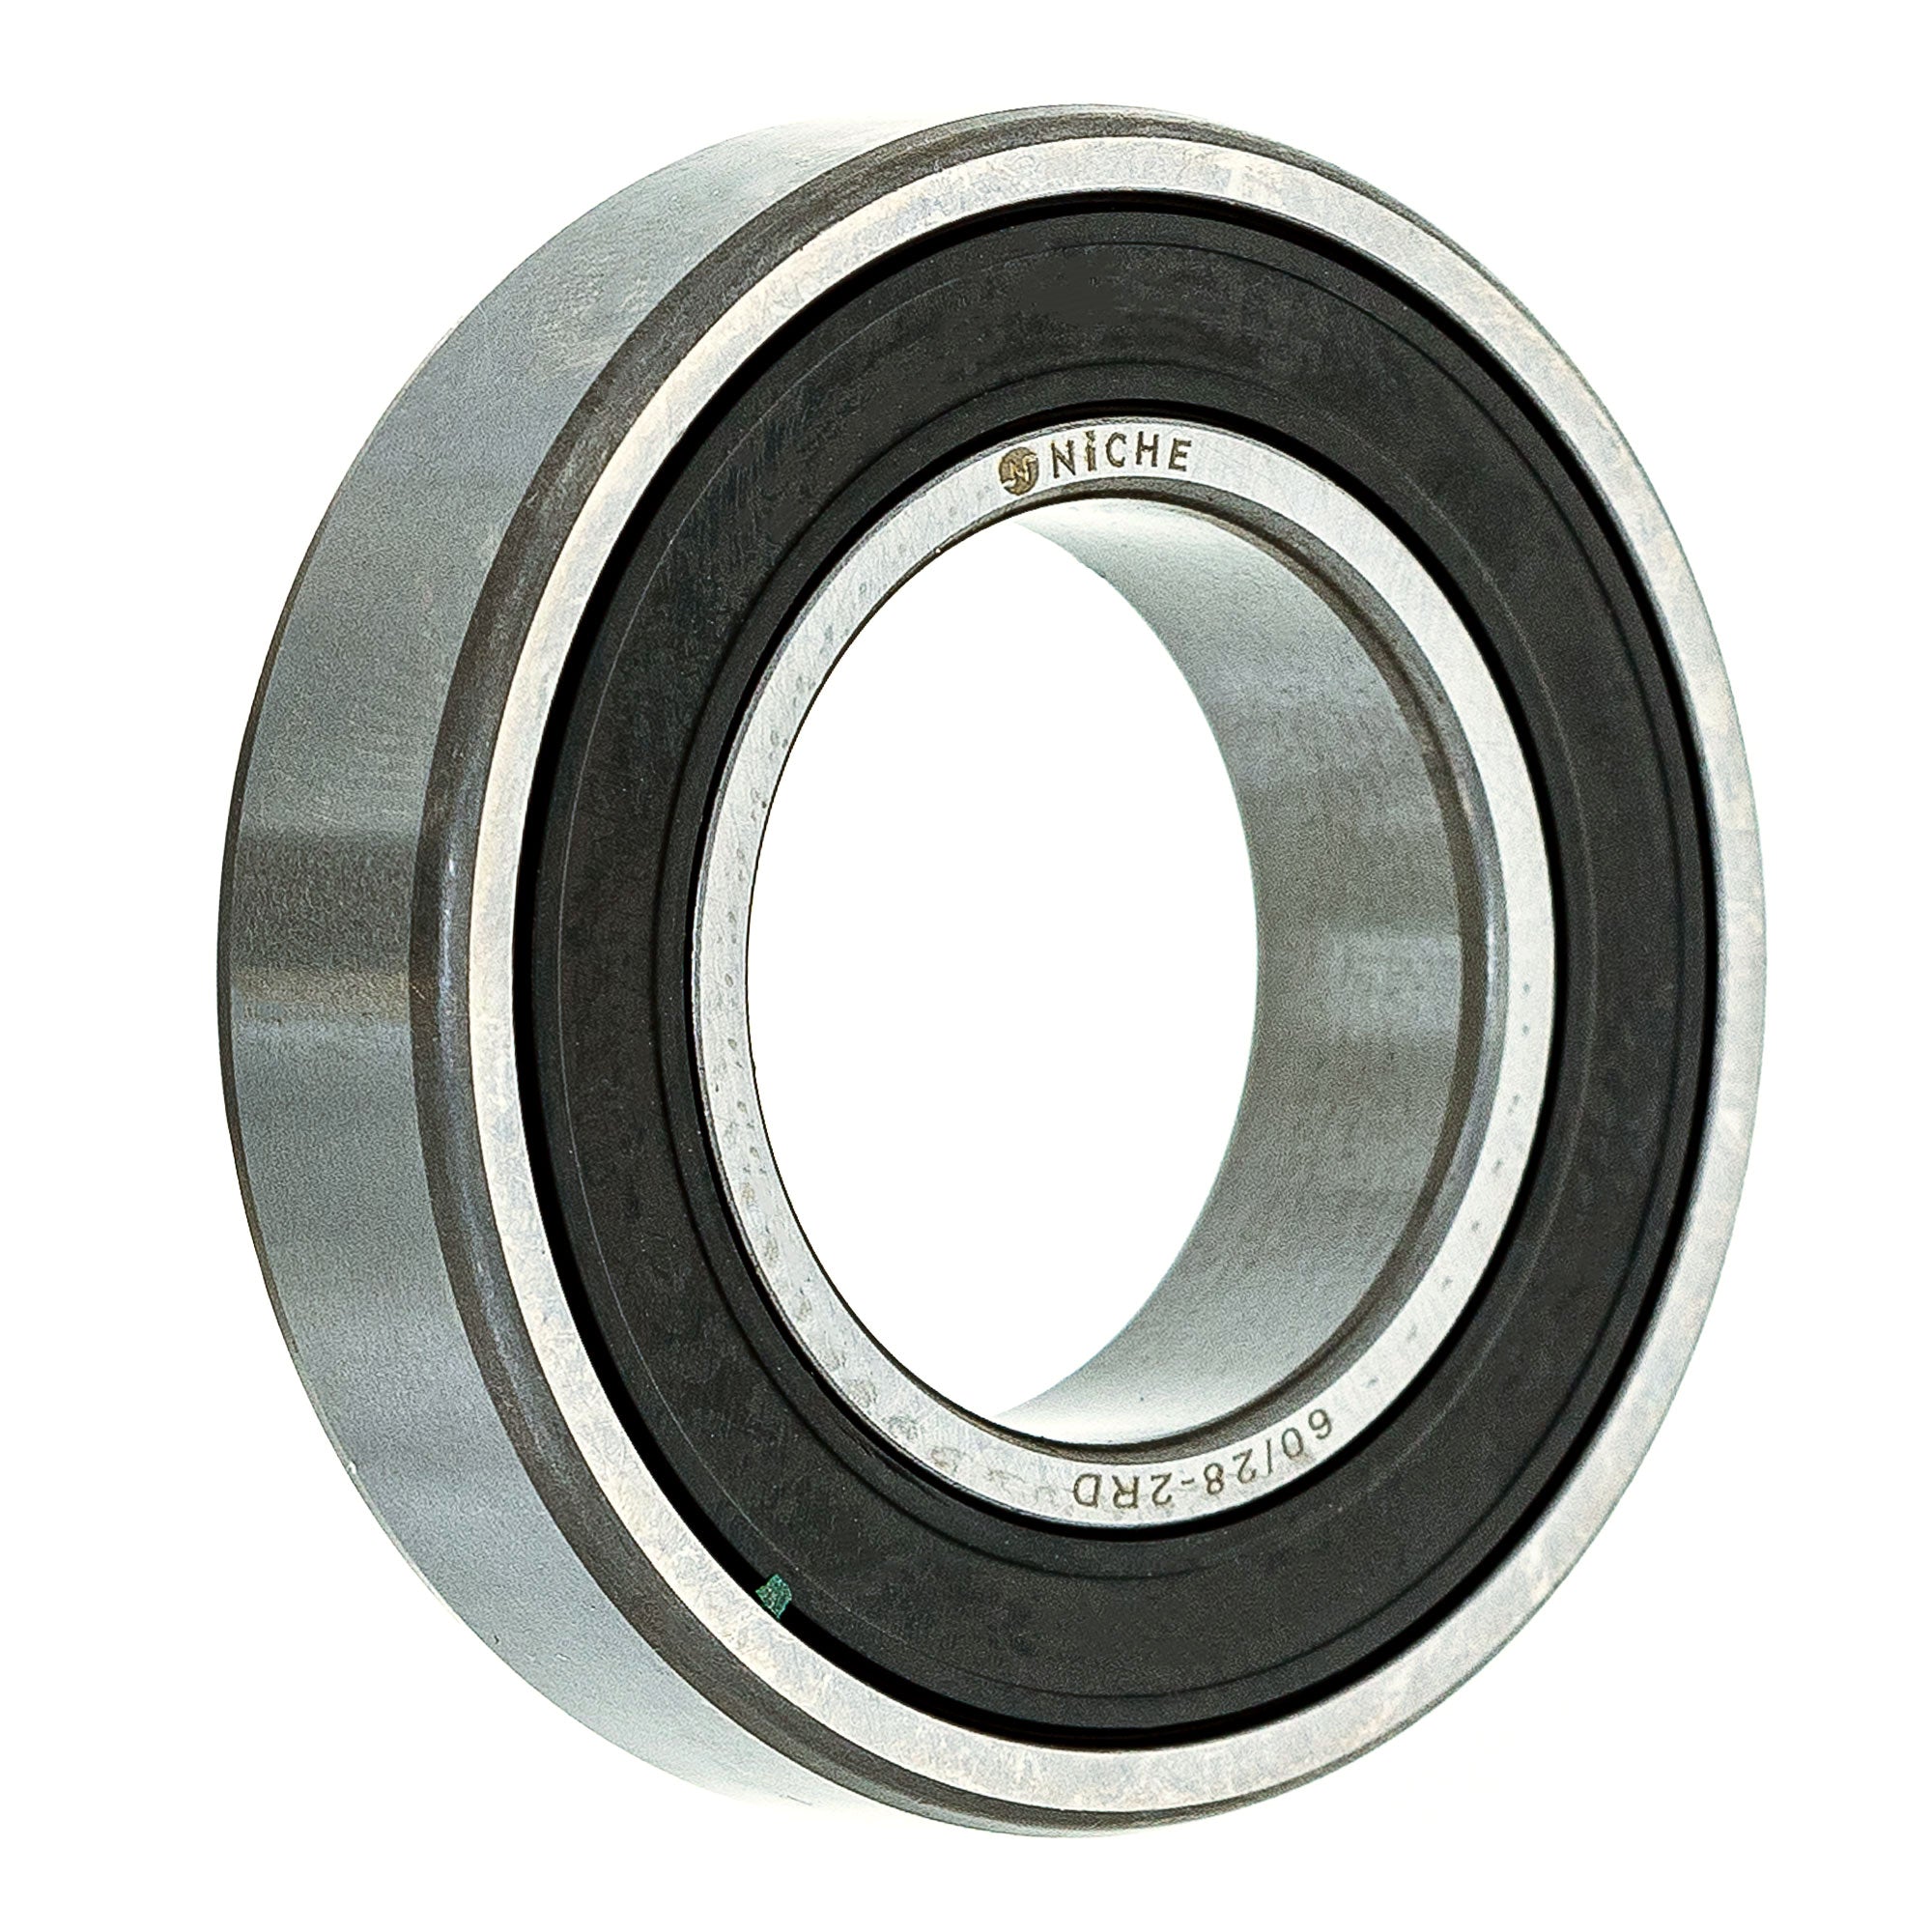 Electric Grade, Single Row, Deep Groove, Ball Bearing for zOTHER SPGT25H54 SOGT26H54 NICHE 519-CBB2321R